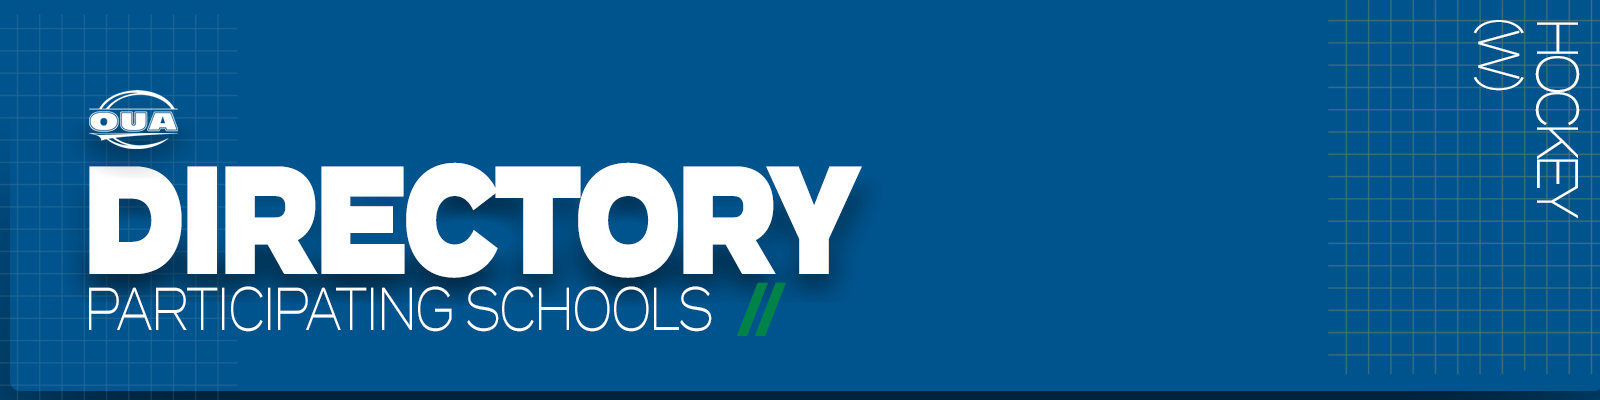 Predominantly blue graphic with large white text on the left side that reads 'Directory, Participating Schools' and small white vertical text on the right side that reads 'Hockey W'